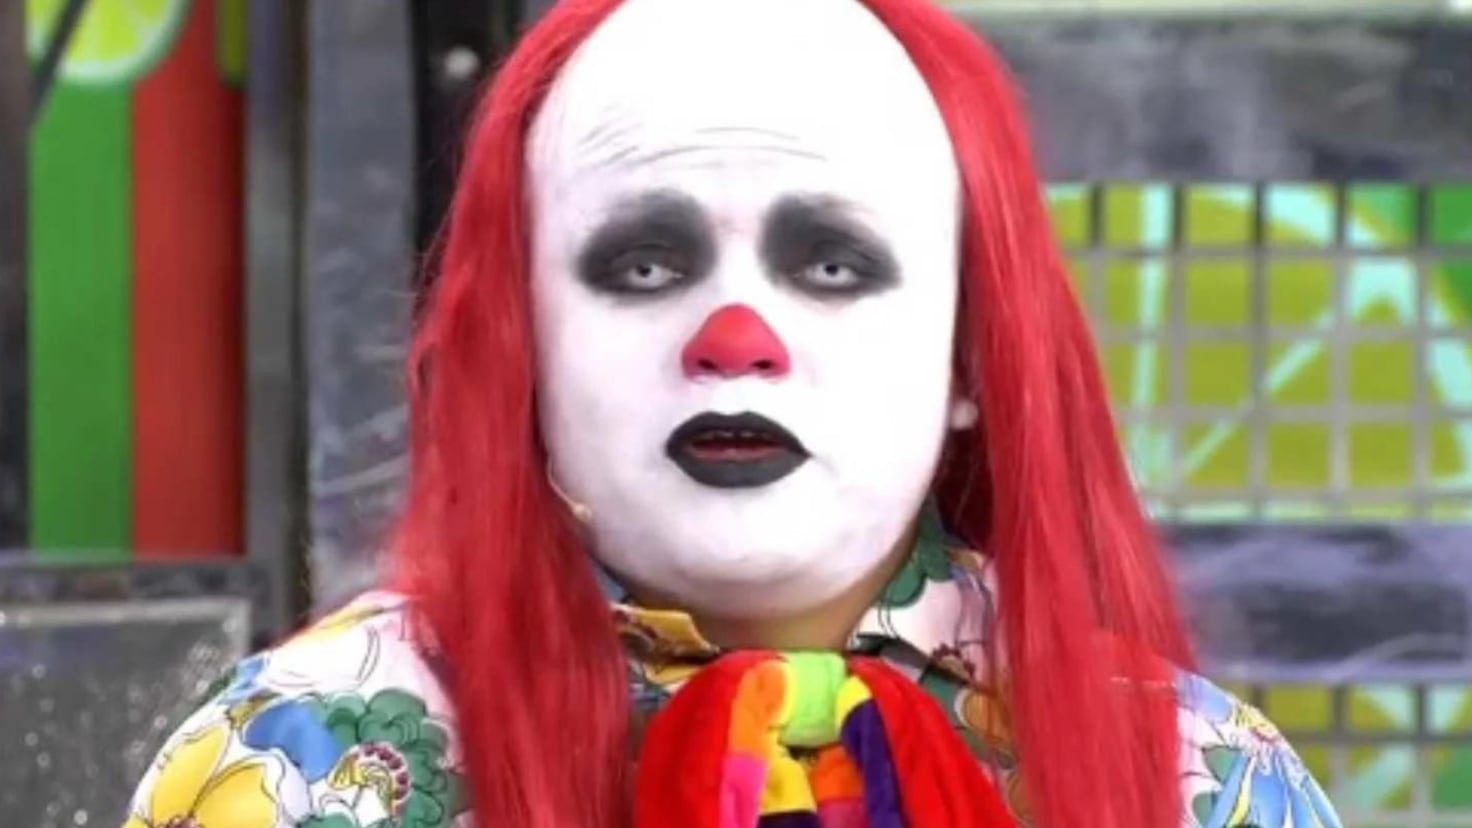 Who is Payasn, the clown who throws pies at the Big Brother contestants?
